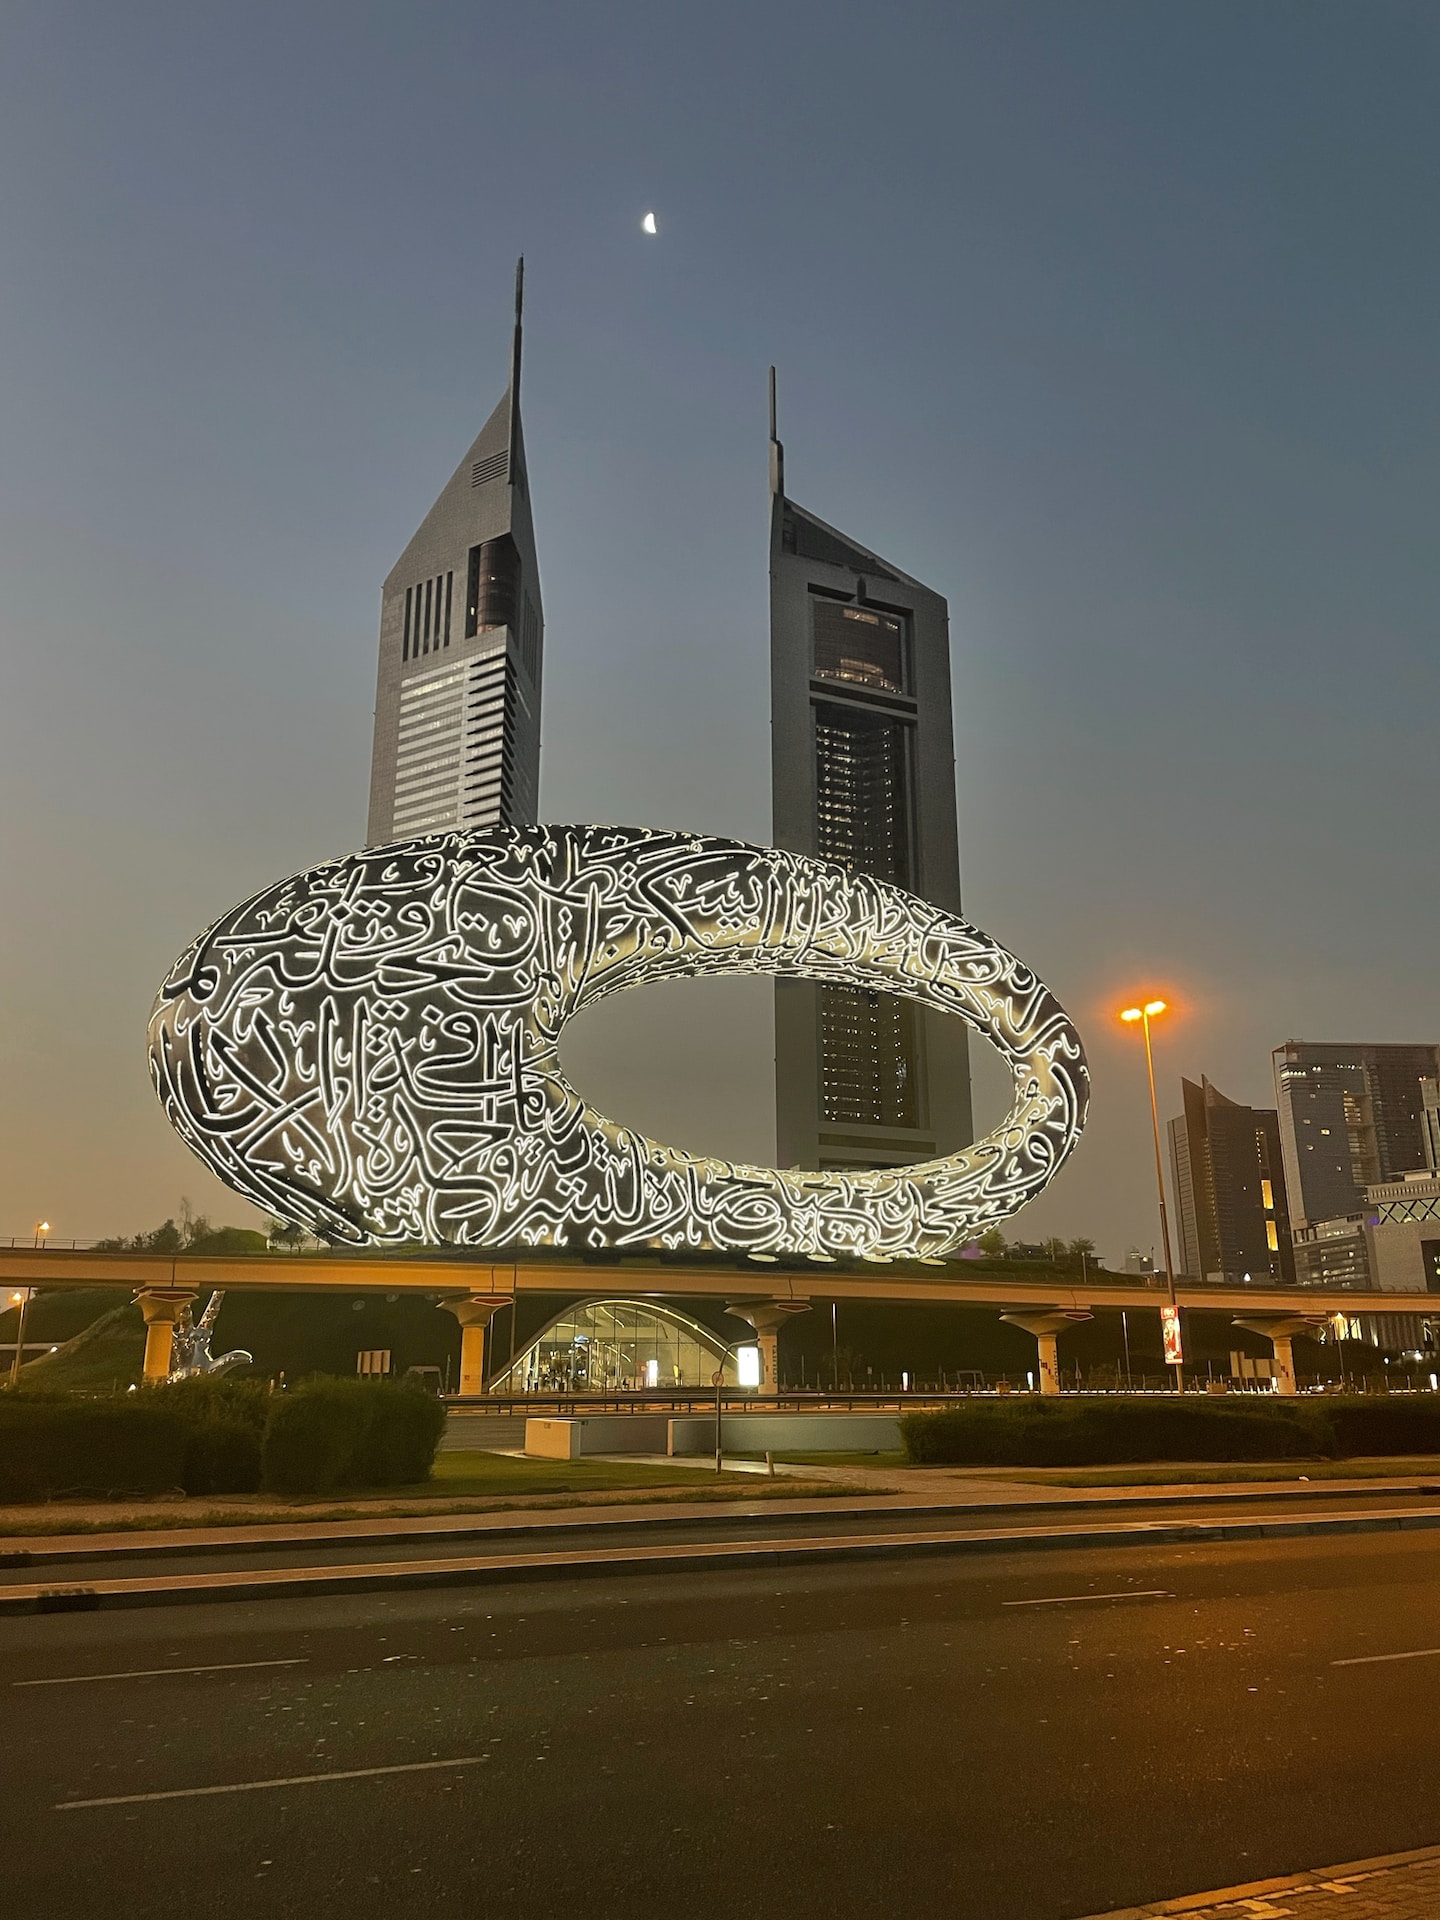 Why are people in Dubai so rich?